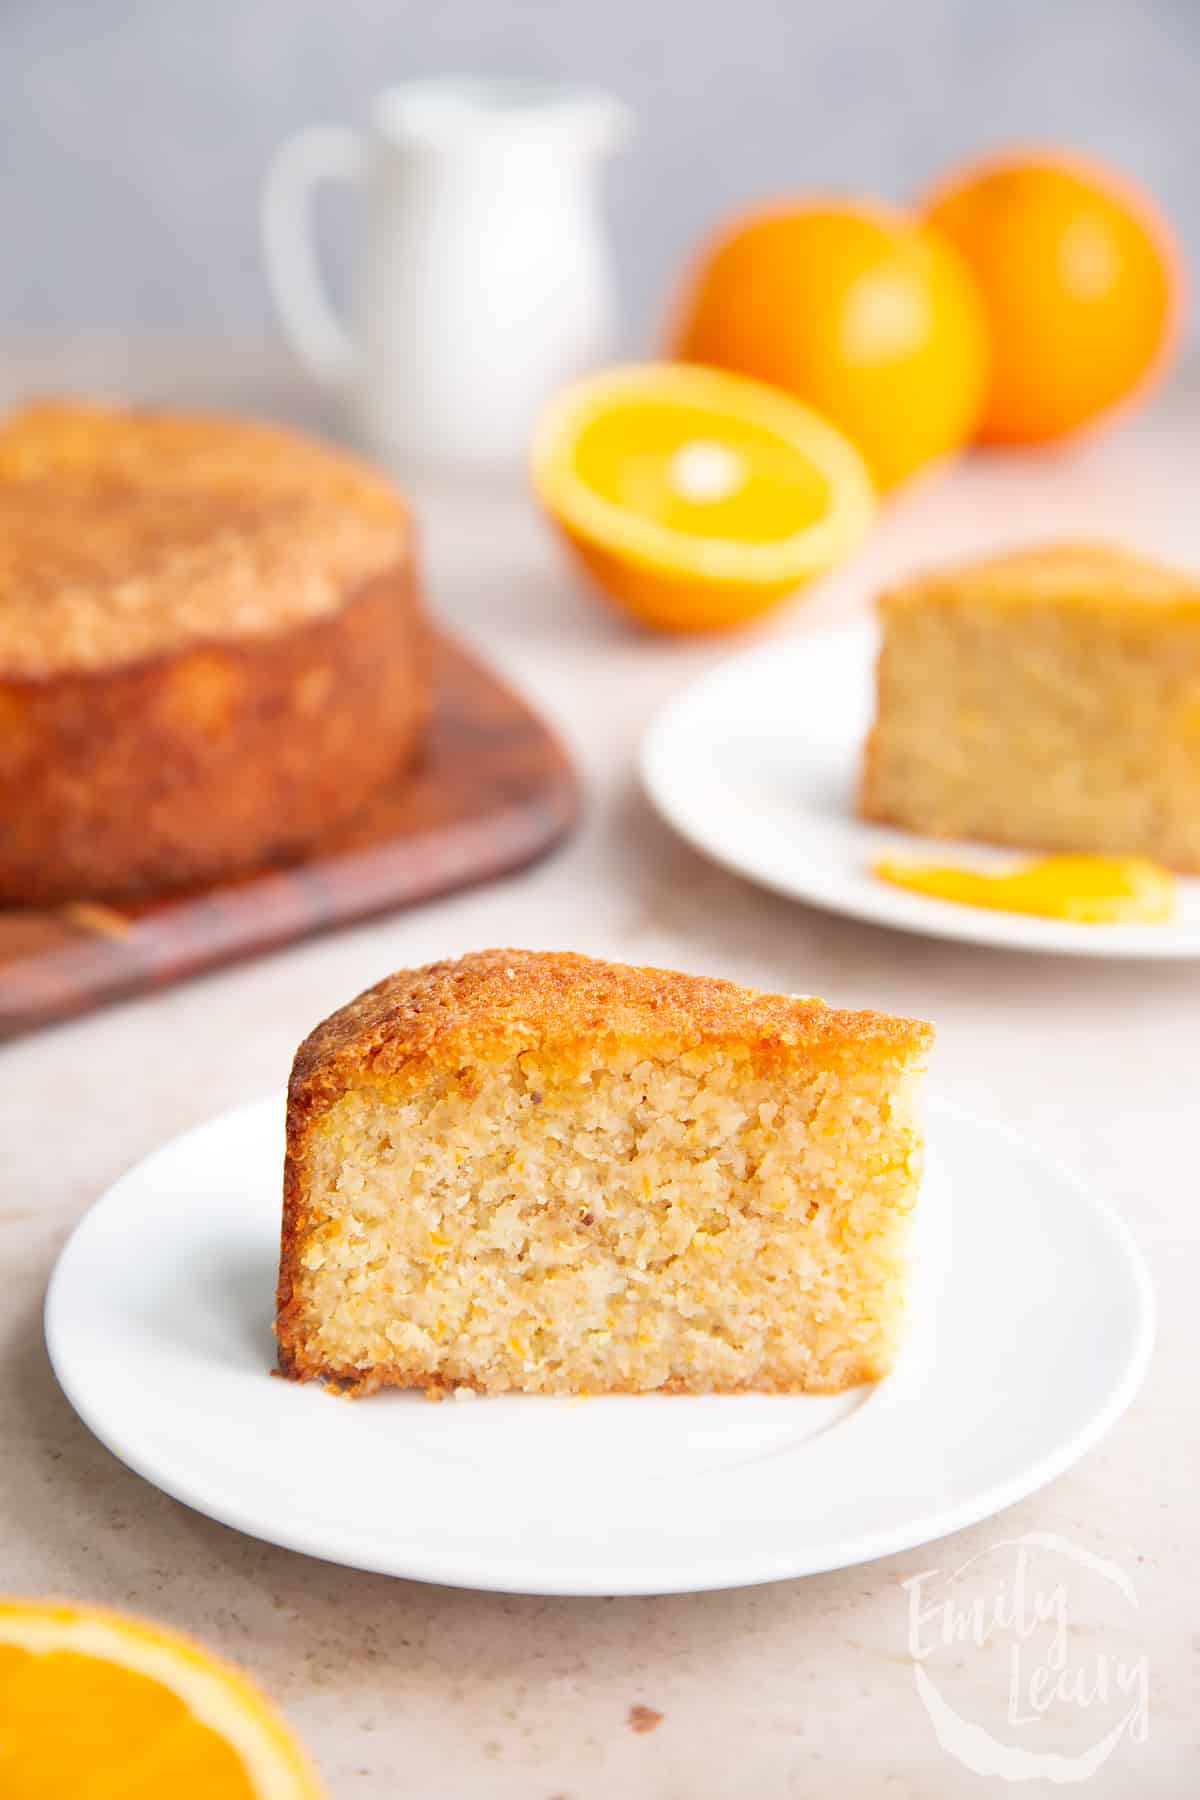 Orange cake cut into slices and served on a white plate.